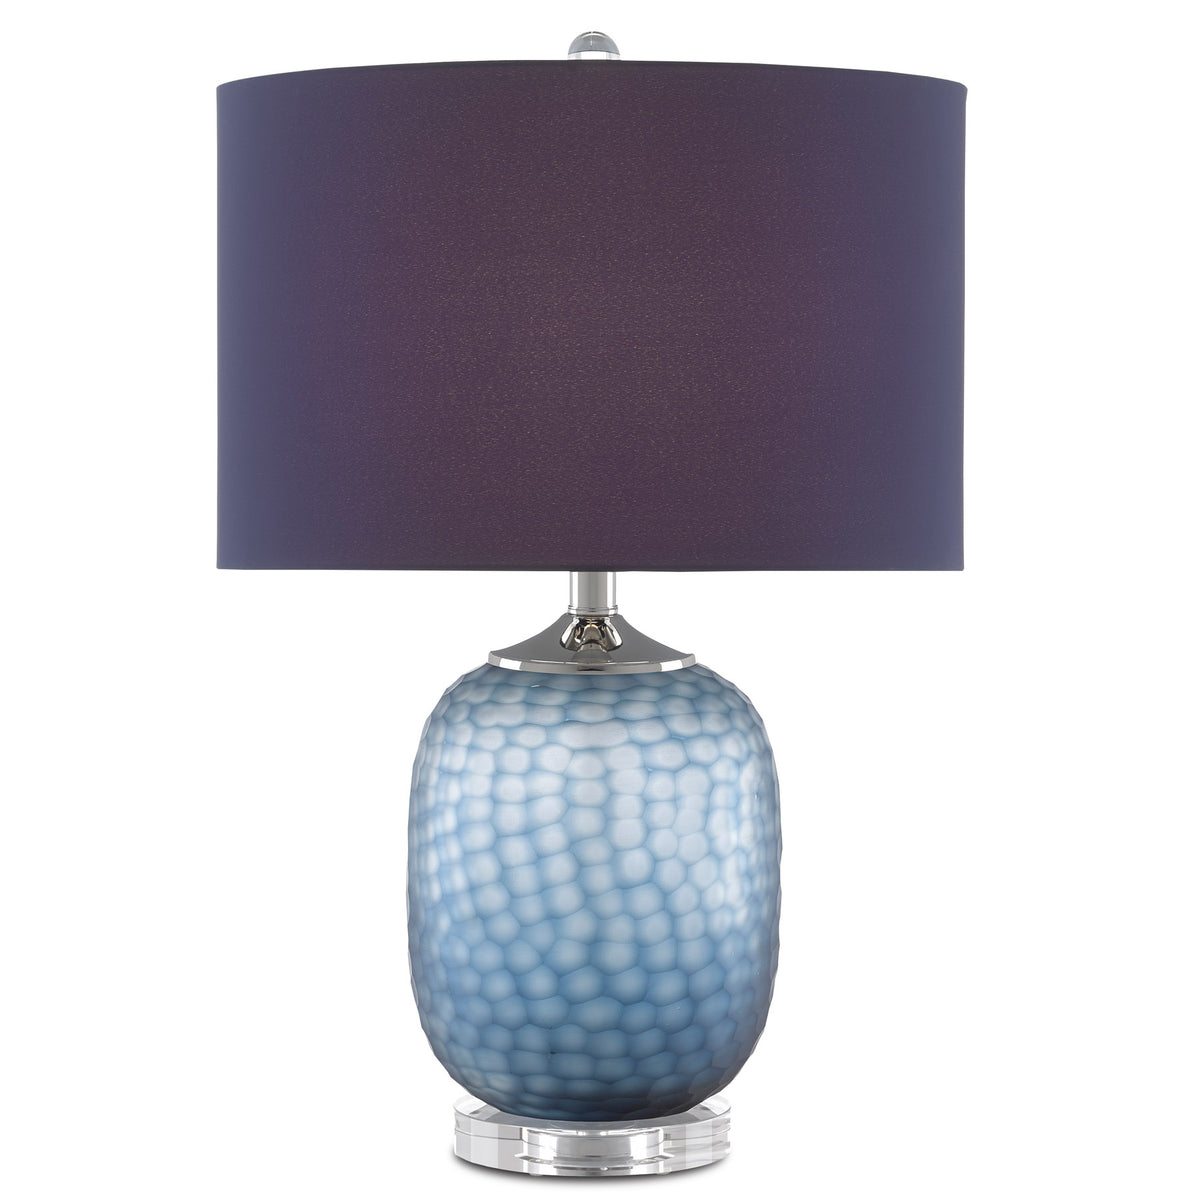 Ionian Table Lamp